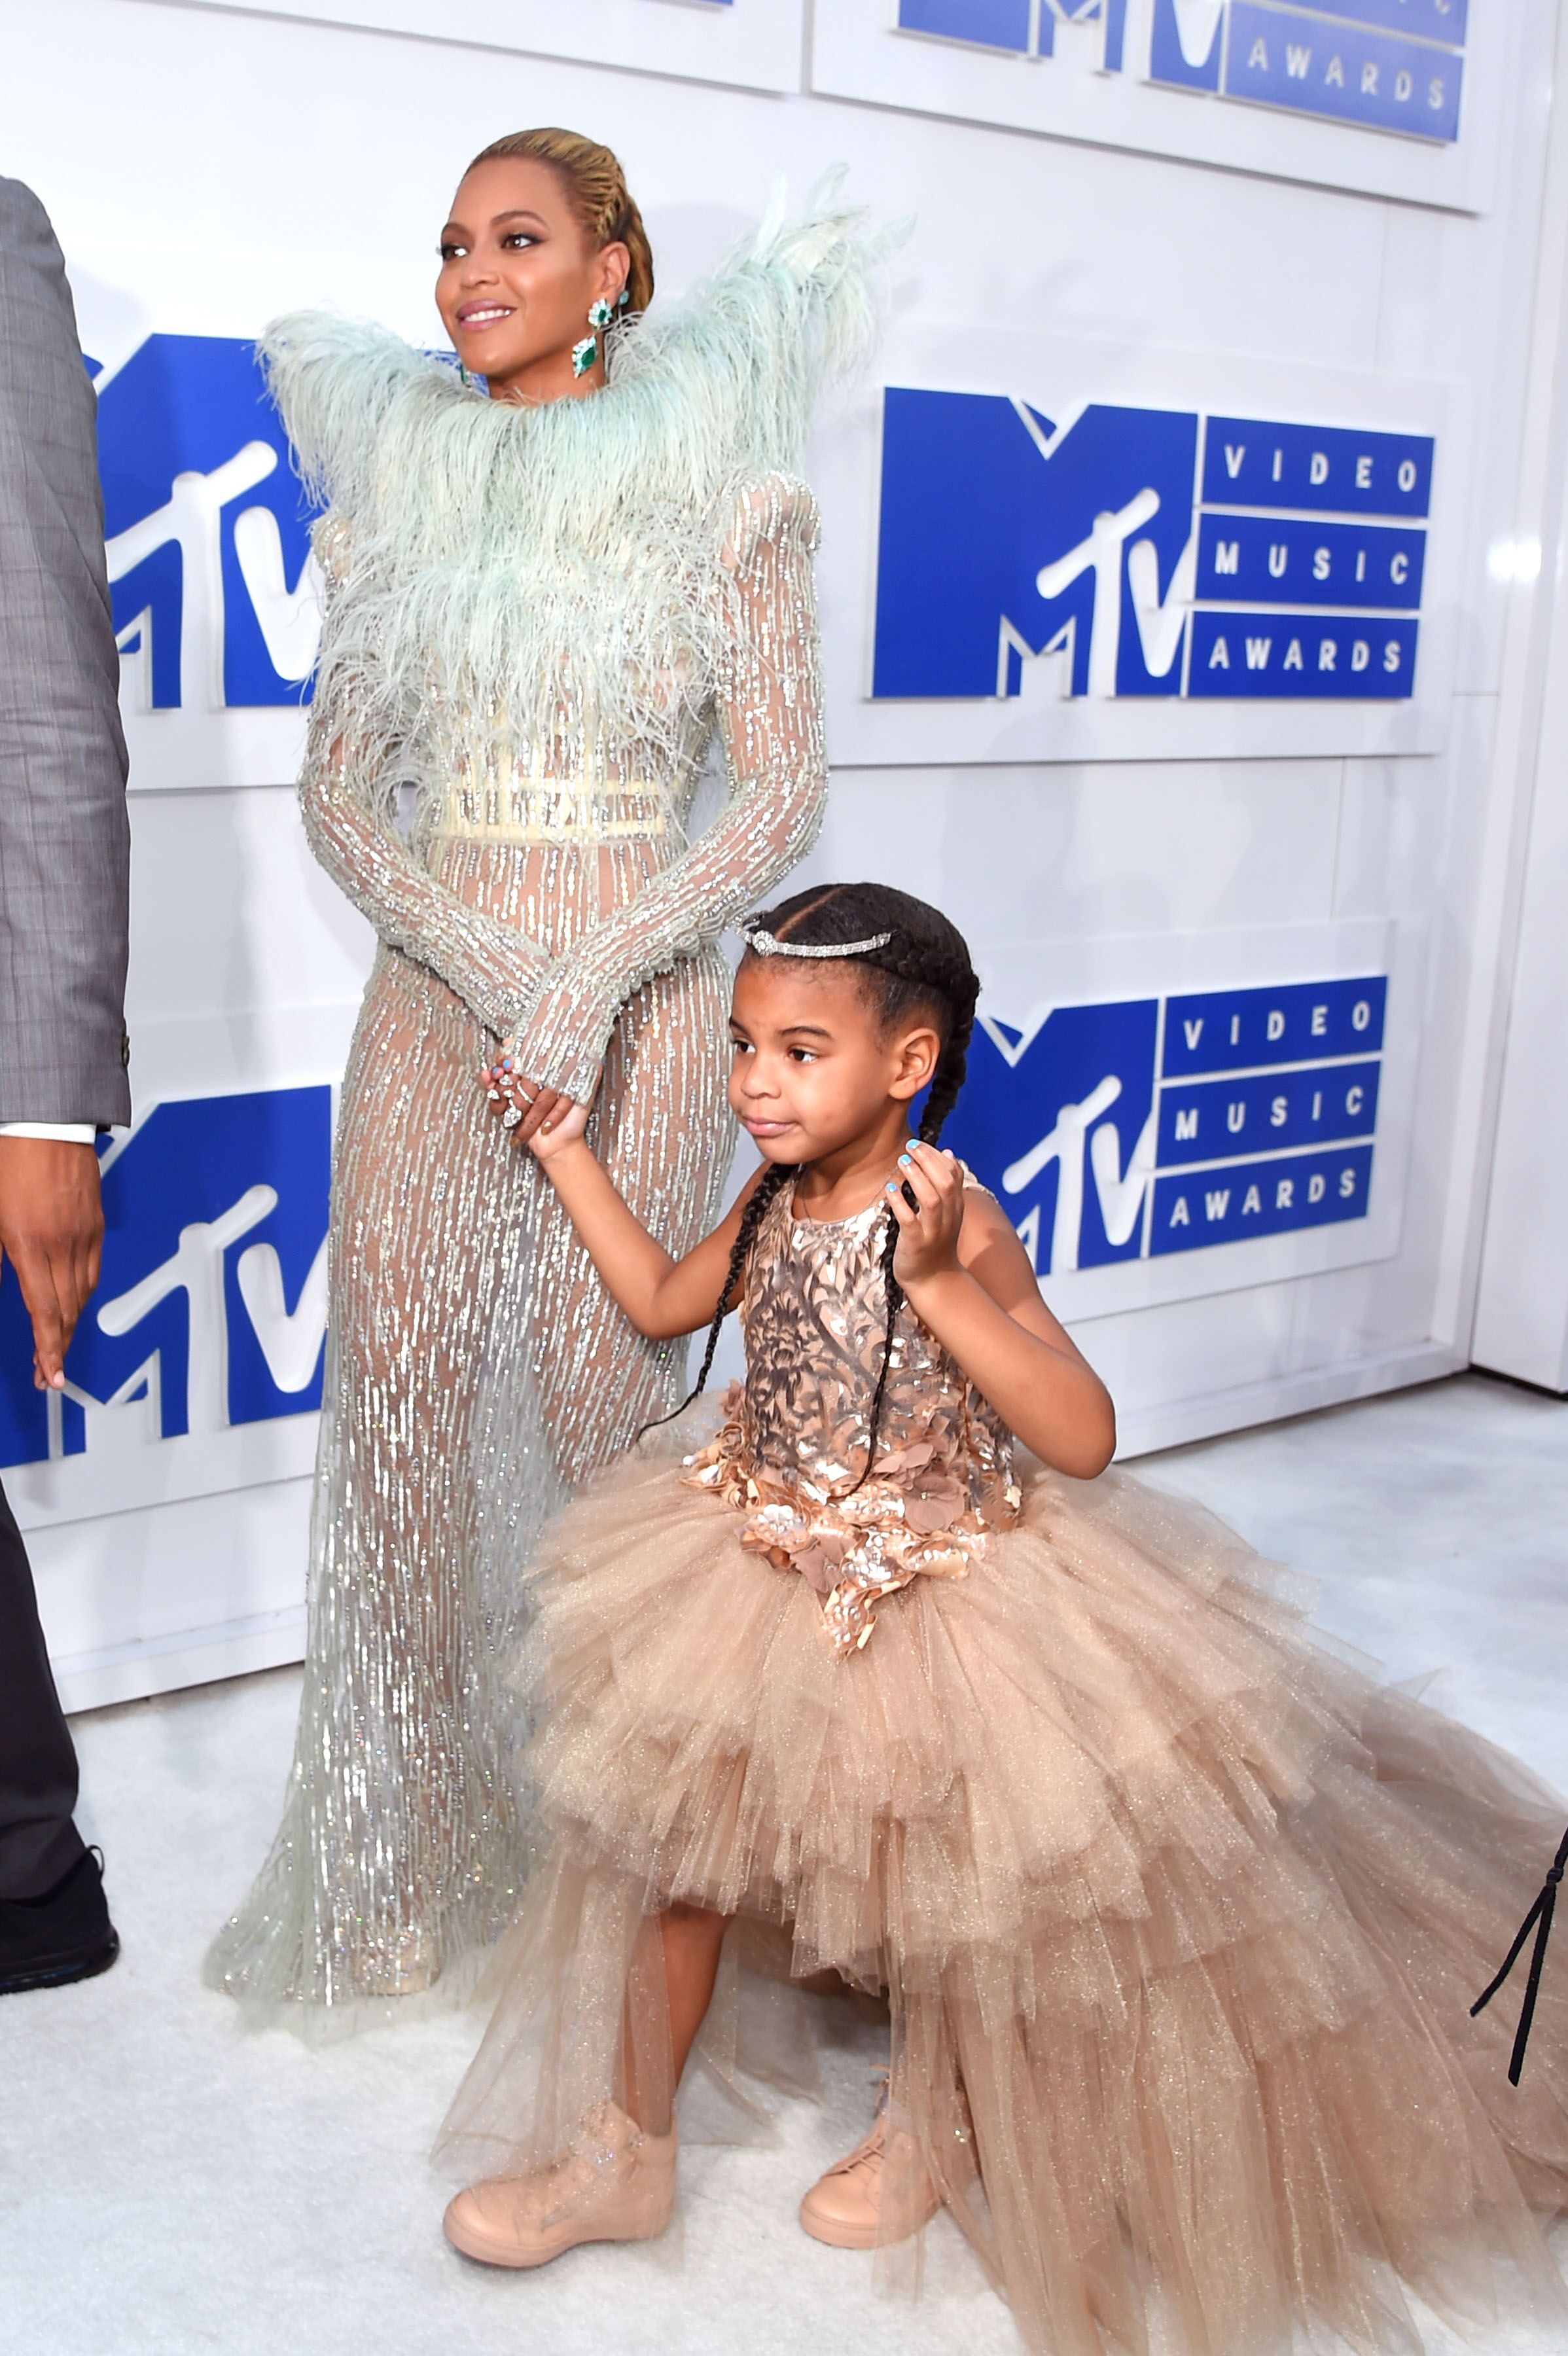 Beyoncé and Blue Ivy at the MTV Music Video Awards in 2016/ Source: Getty Images